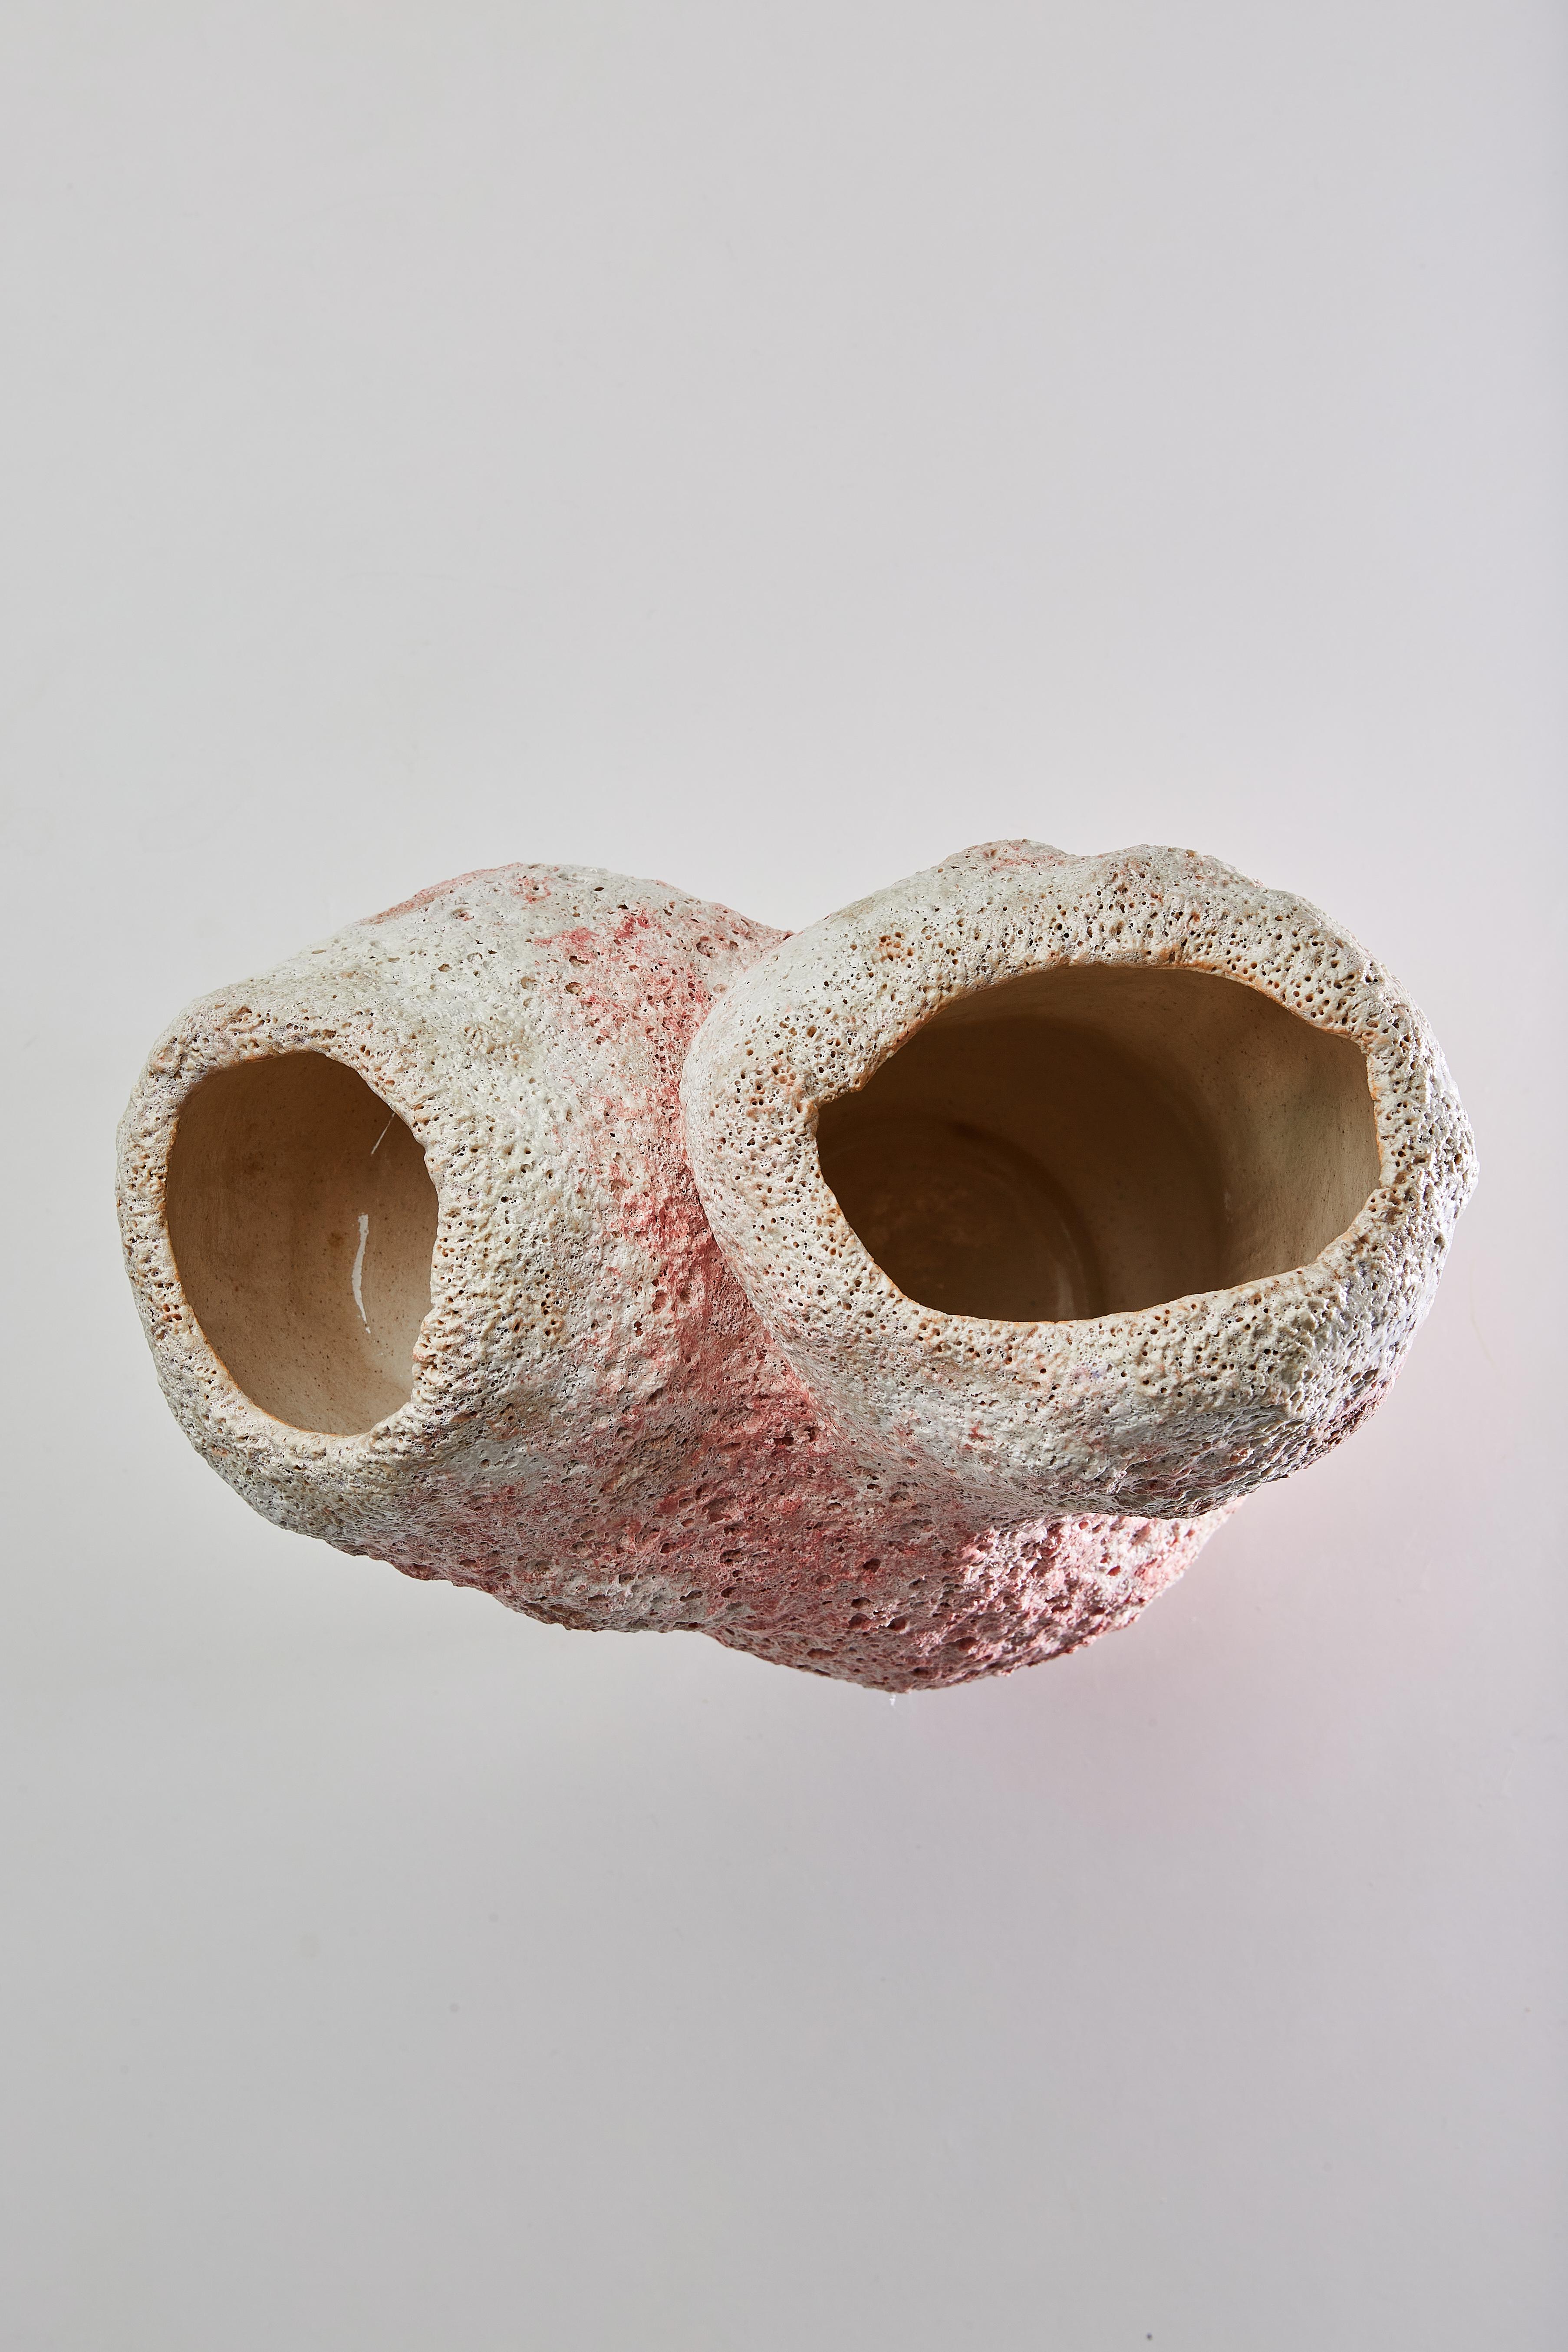 Coral Y Atlantis Collection vase by Angeliki Stamatakou
One of a kind, 2022
Dimensions: H23 x W20.5 cm.
Materials: Stoneware, handmade glaze.

Angeliki Stamatakou is a ceramics artist based in Athens, Greece. She studied Fine Arts at AKTO